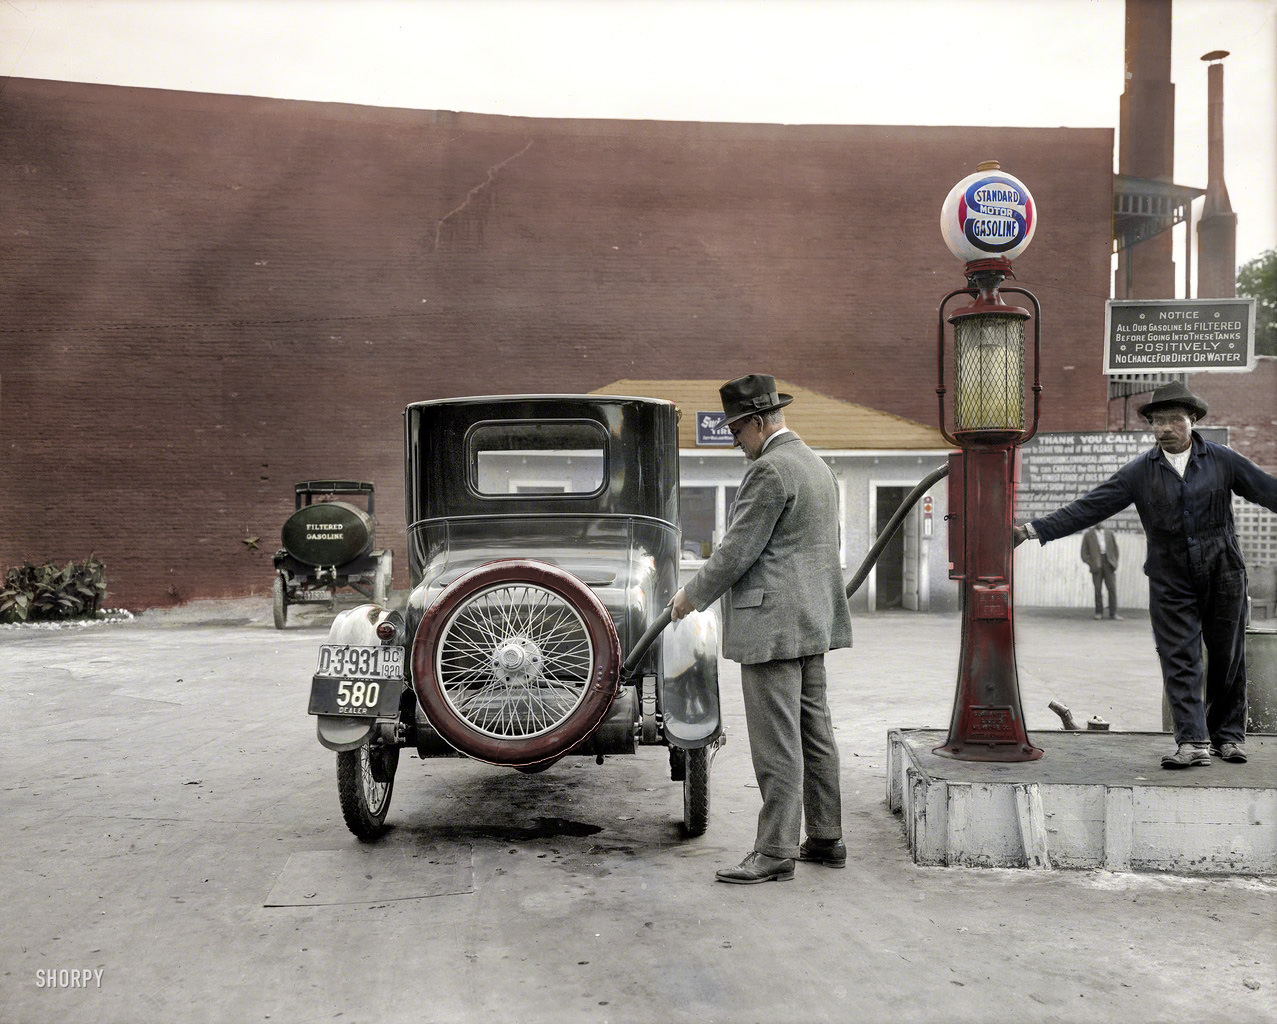 I tried to colorize this fascinating Shorpy photo. View full size.